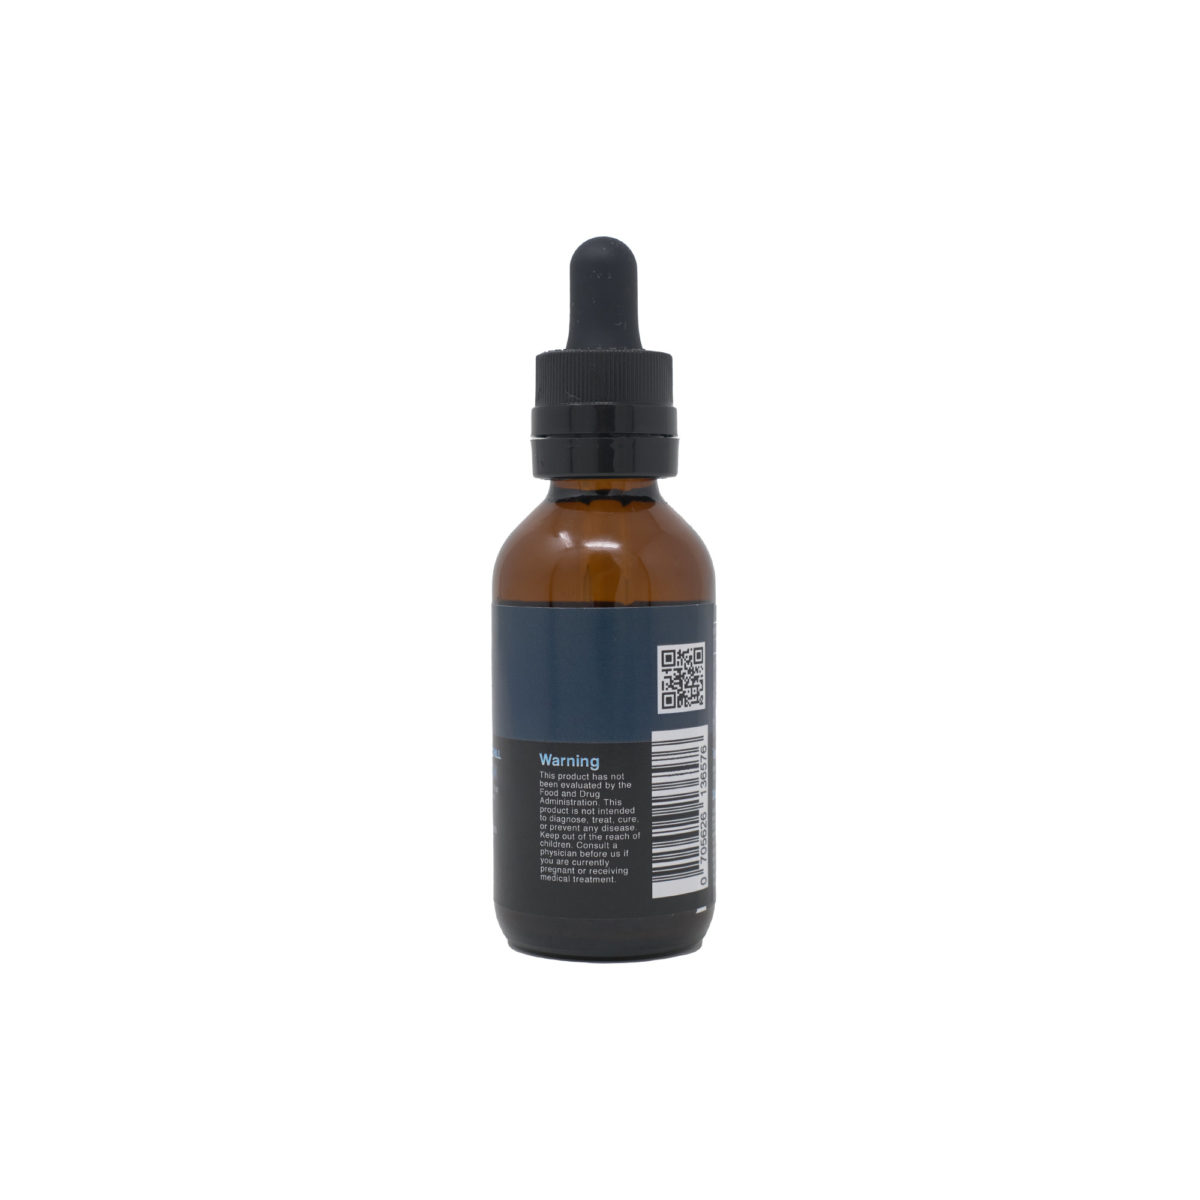 RELIEF CBD Oil Tincture by Snapdragon Selects - Snapdragon Hemp